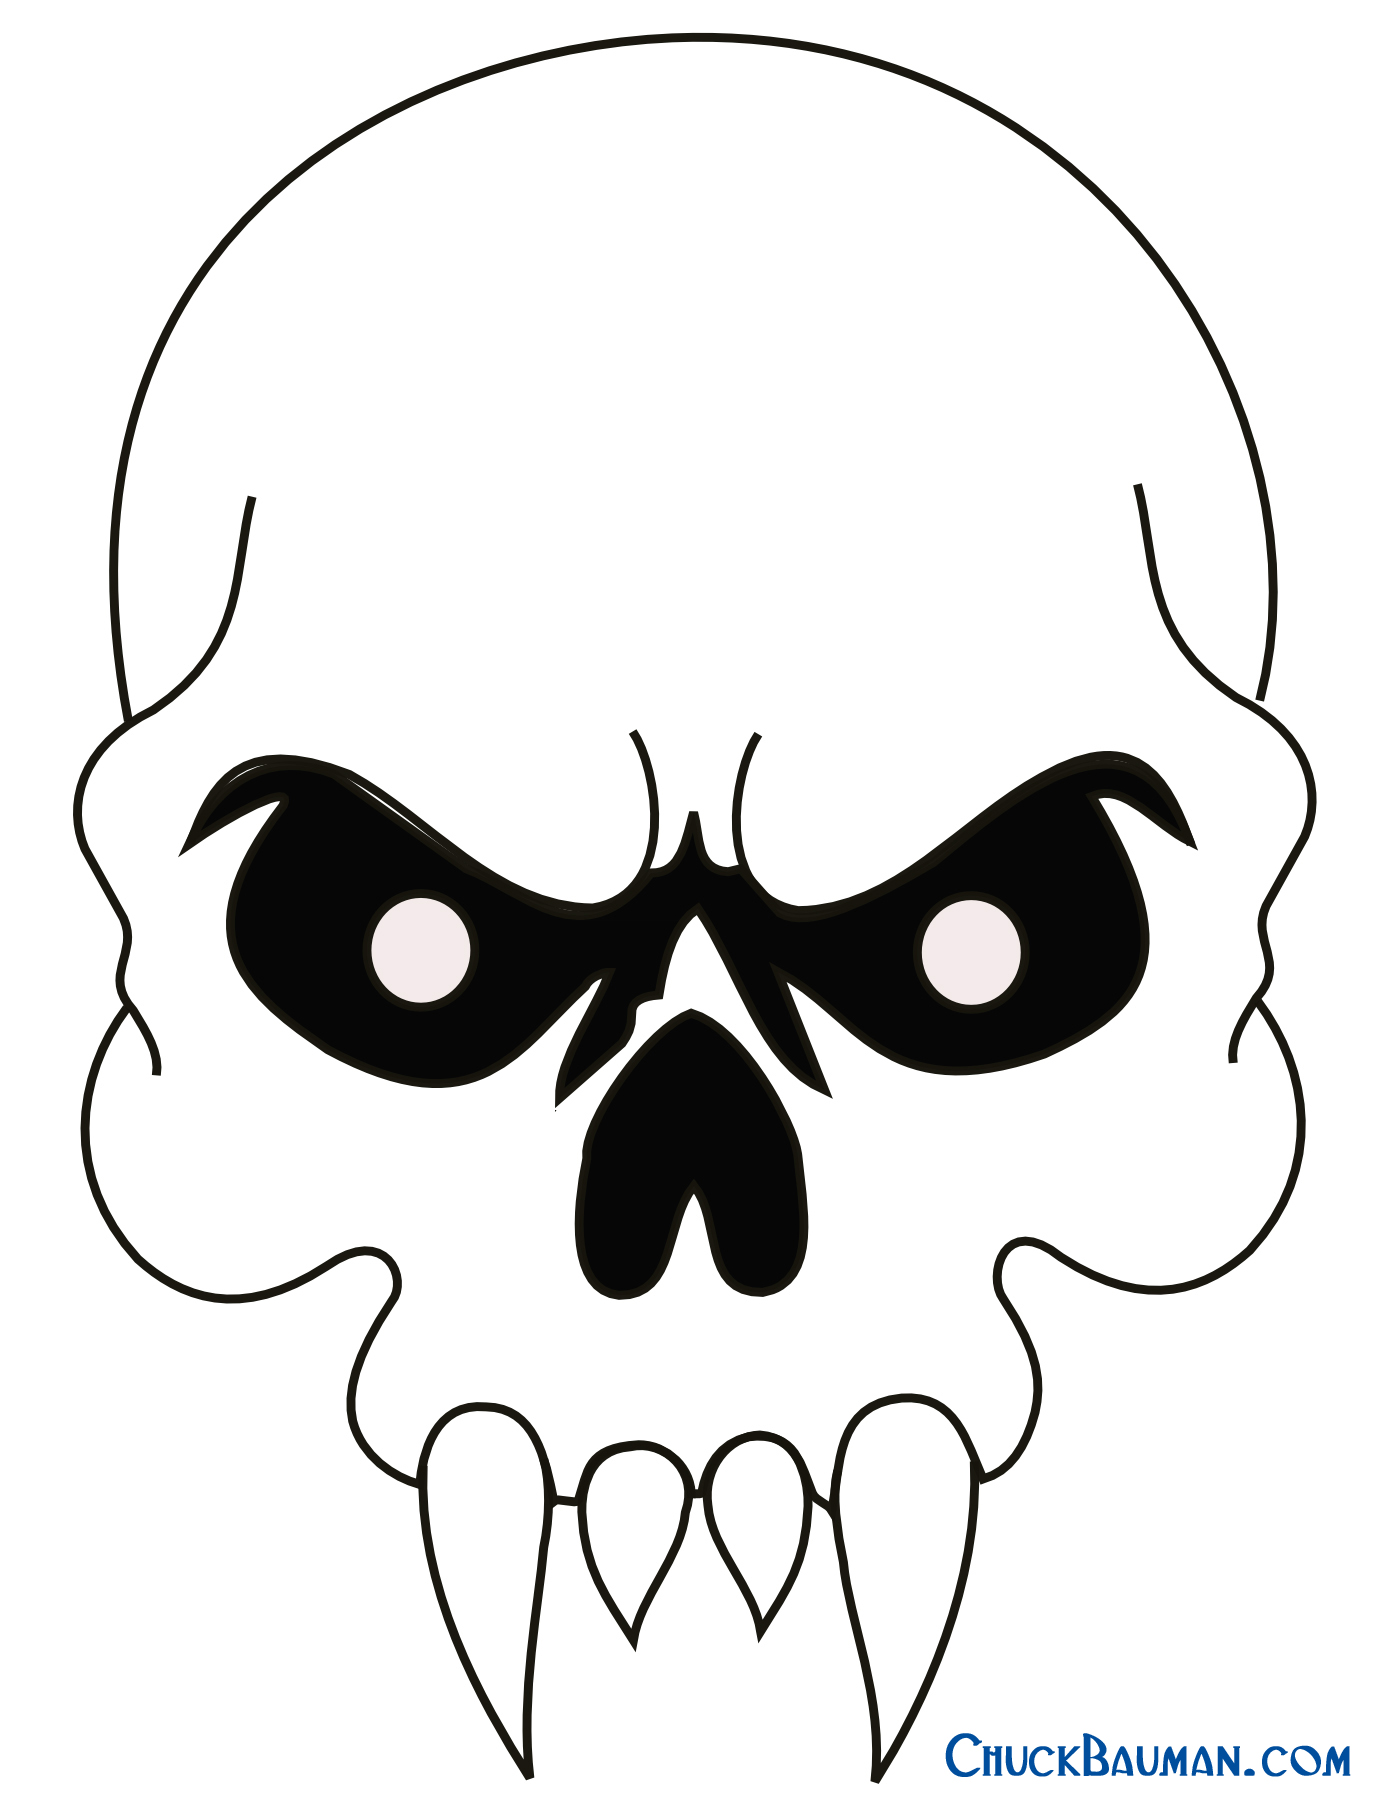 How to Draw a Skull for Halloween - Tina Lewis Art